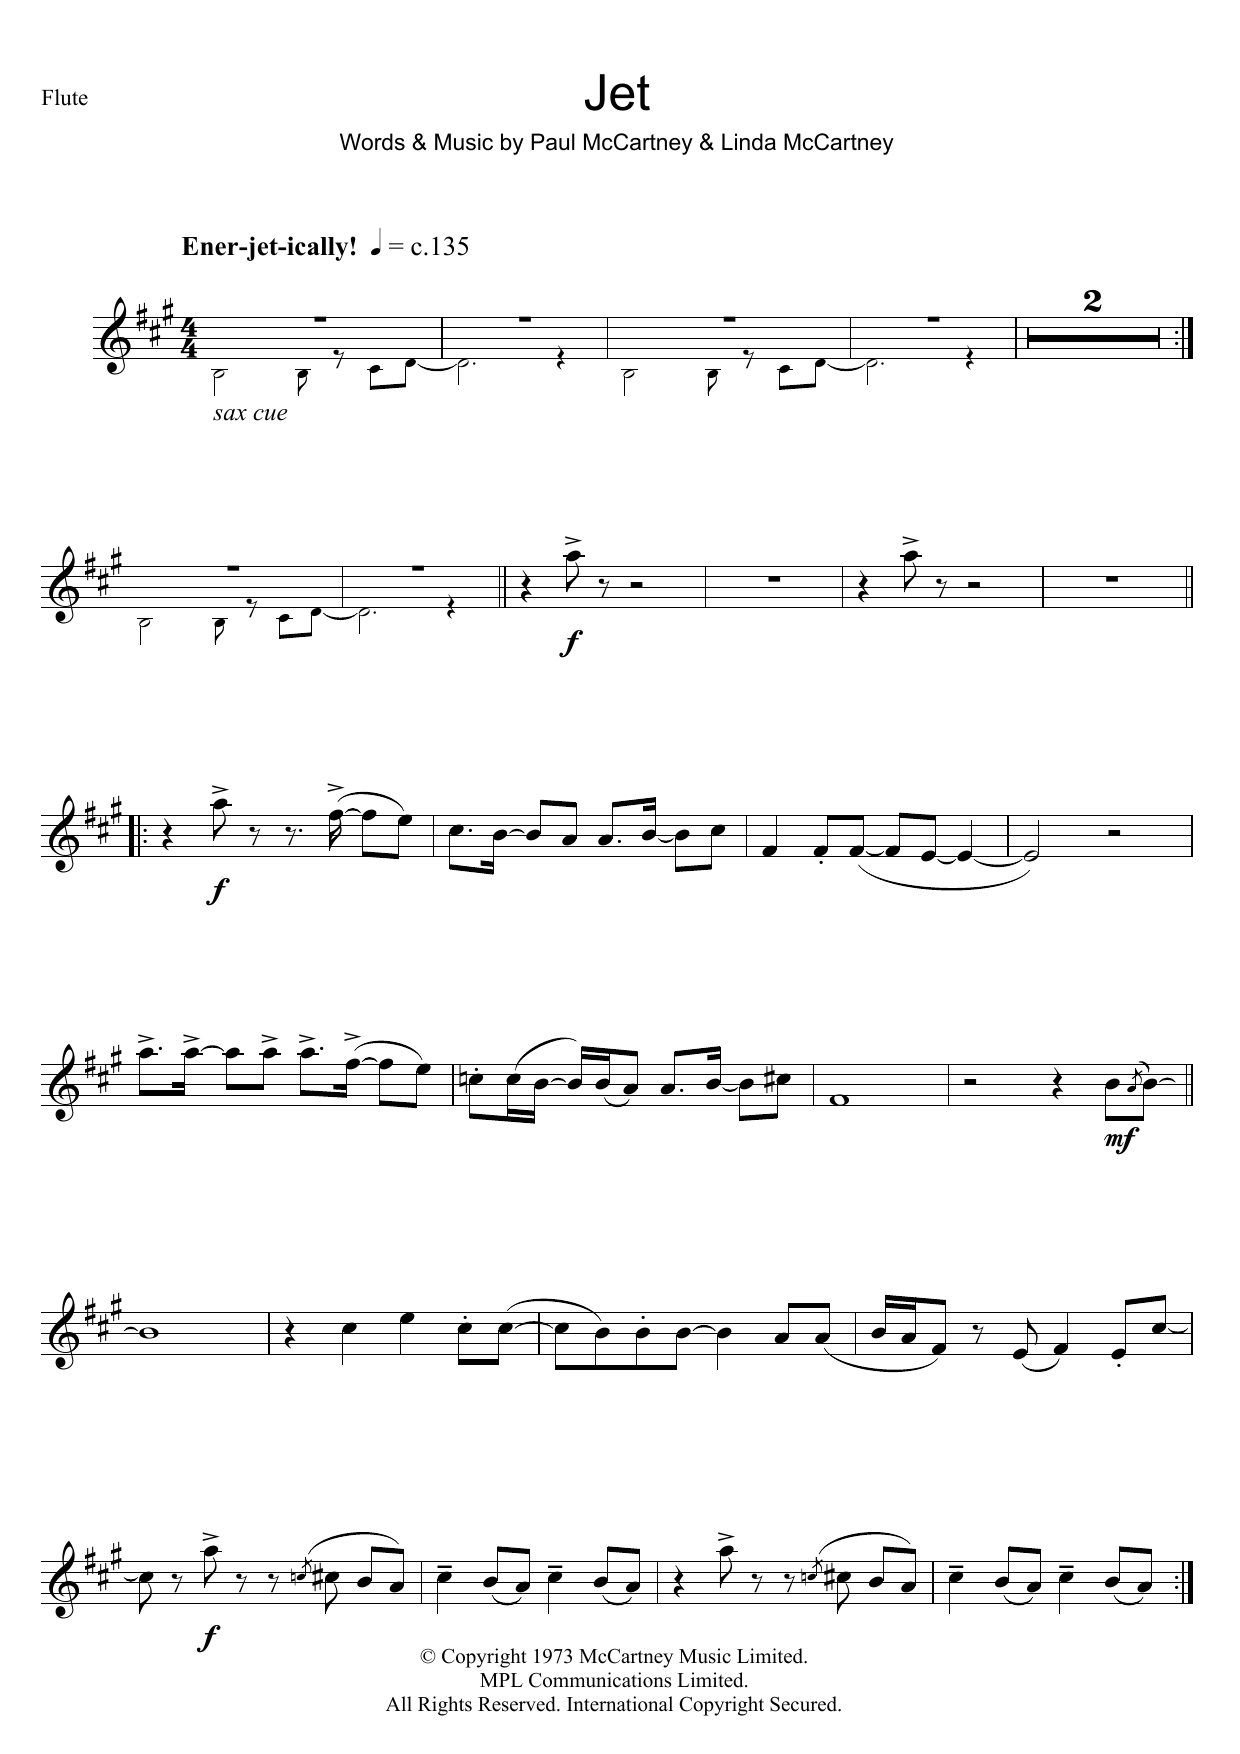 Paul McCartney & Wings Jet sheet music notes and chords. Download Printable PDF.